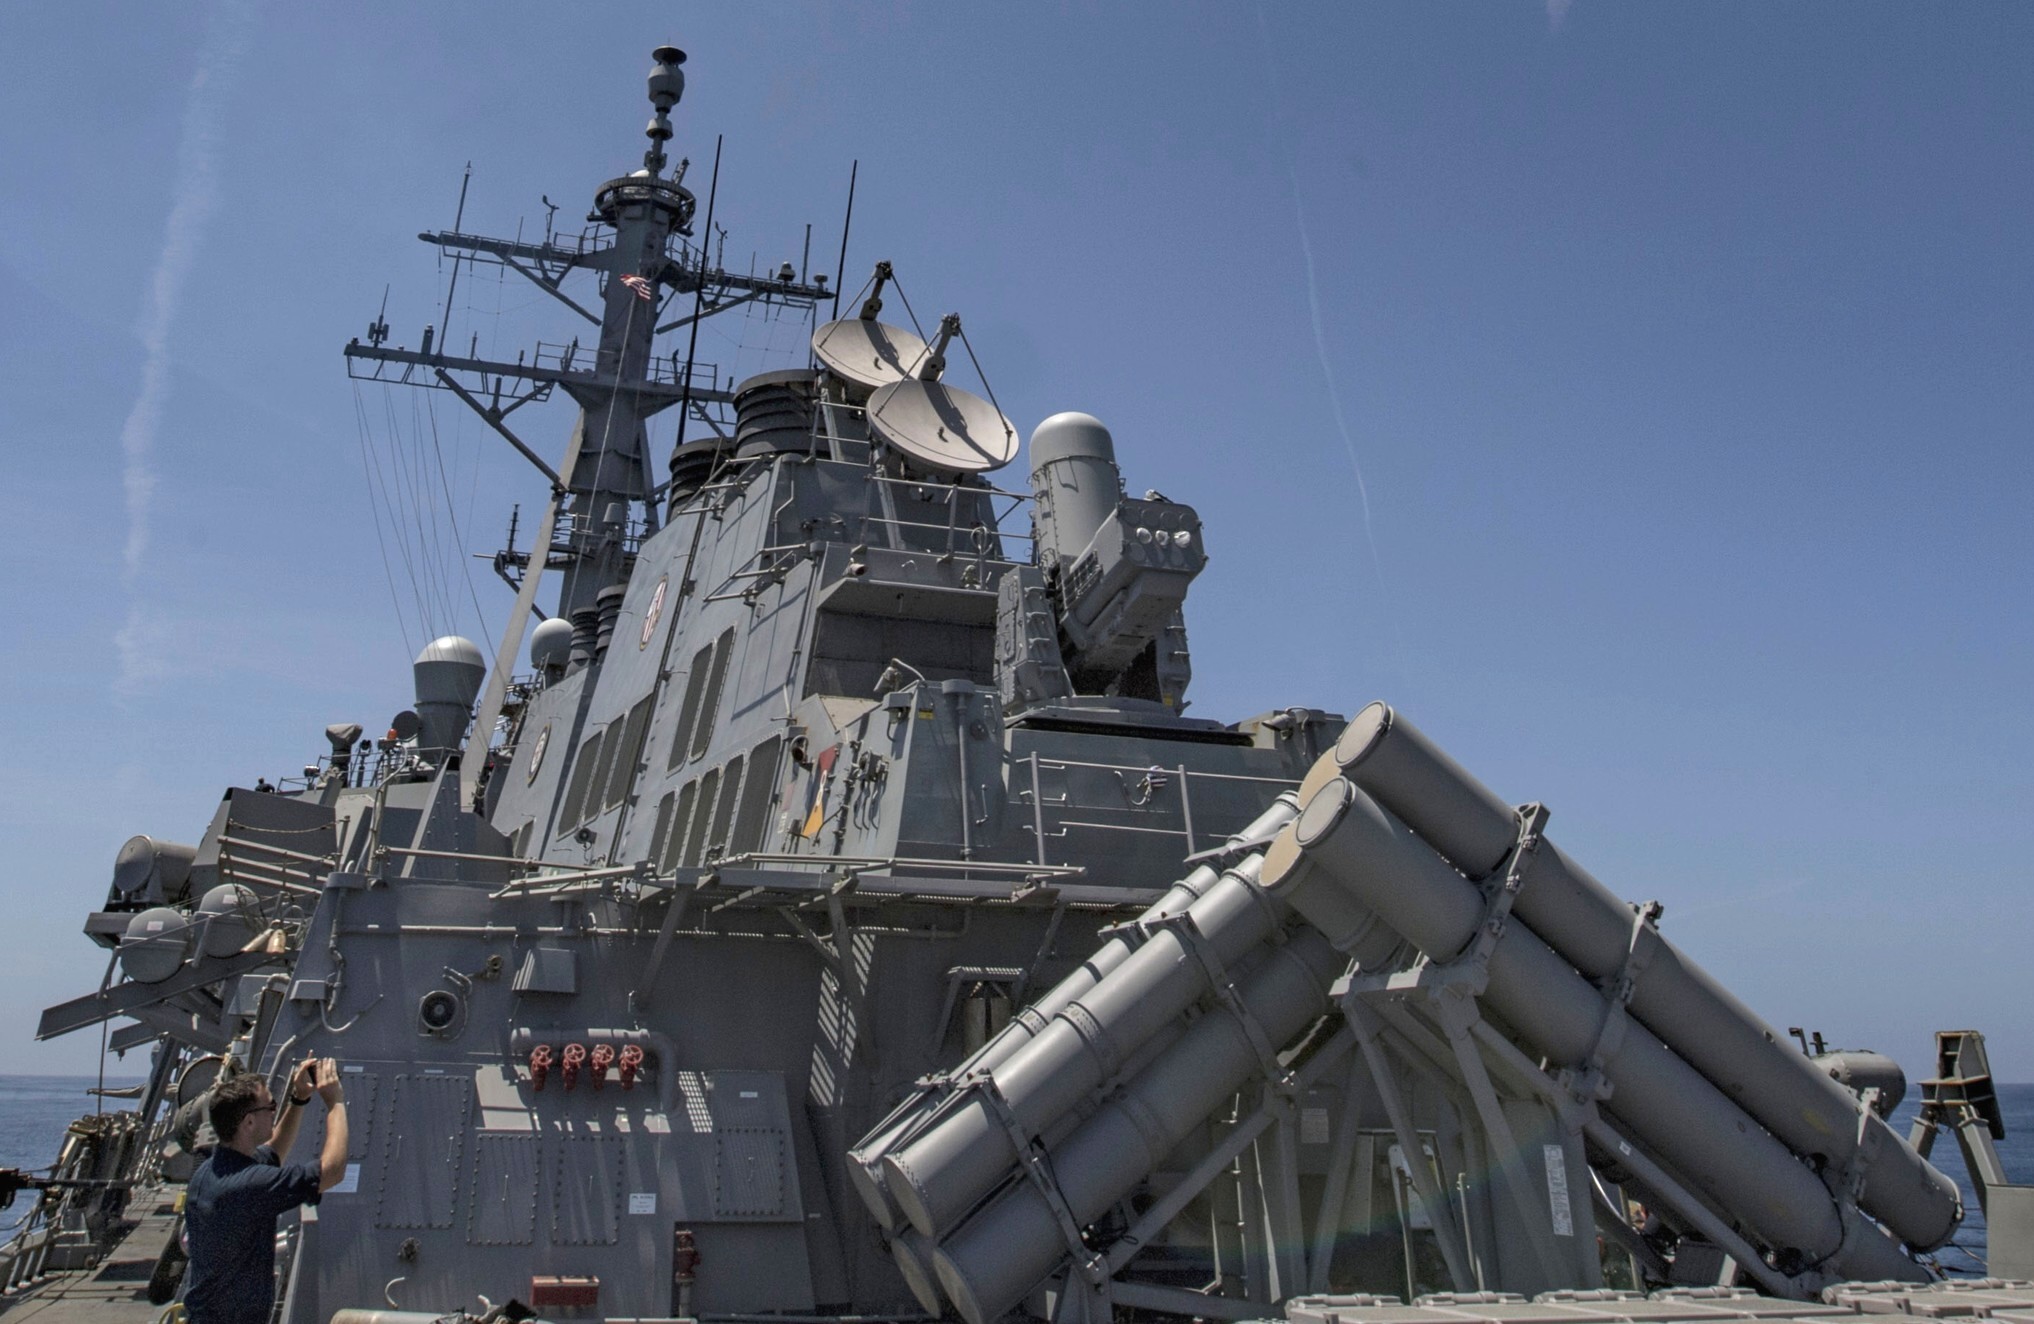 ddg-64 uss carney guided missile destroyer arleigh burke class 112